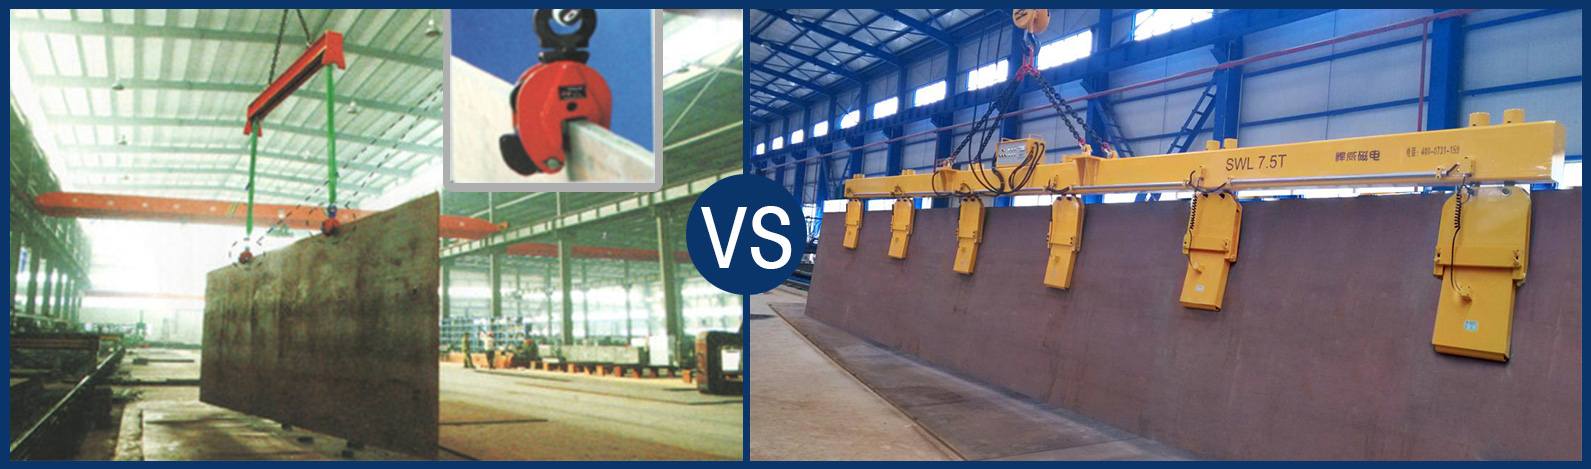 Tilt Lifting of Steel Plate - Lifting Magnets VS Vertical Plate Clamps